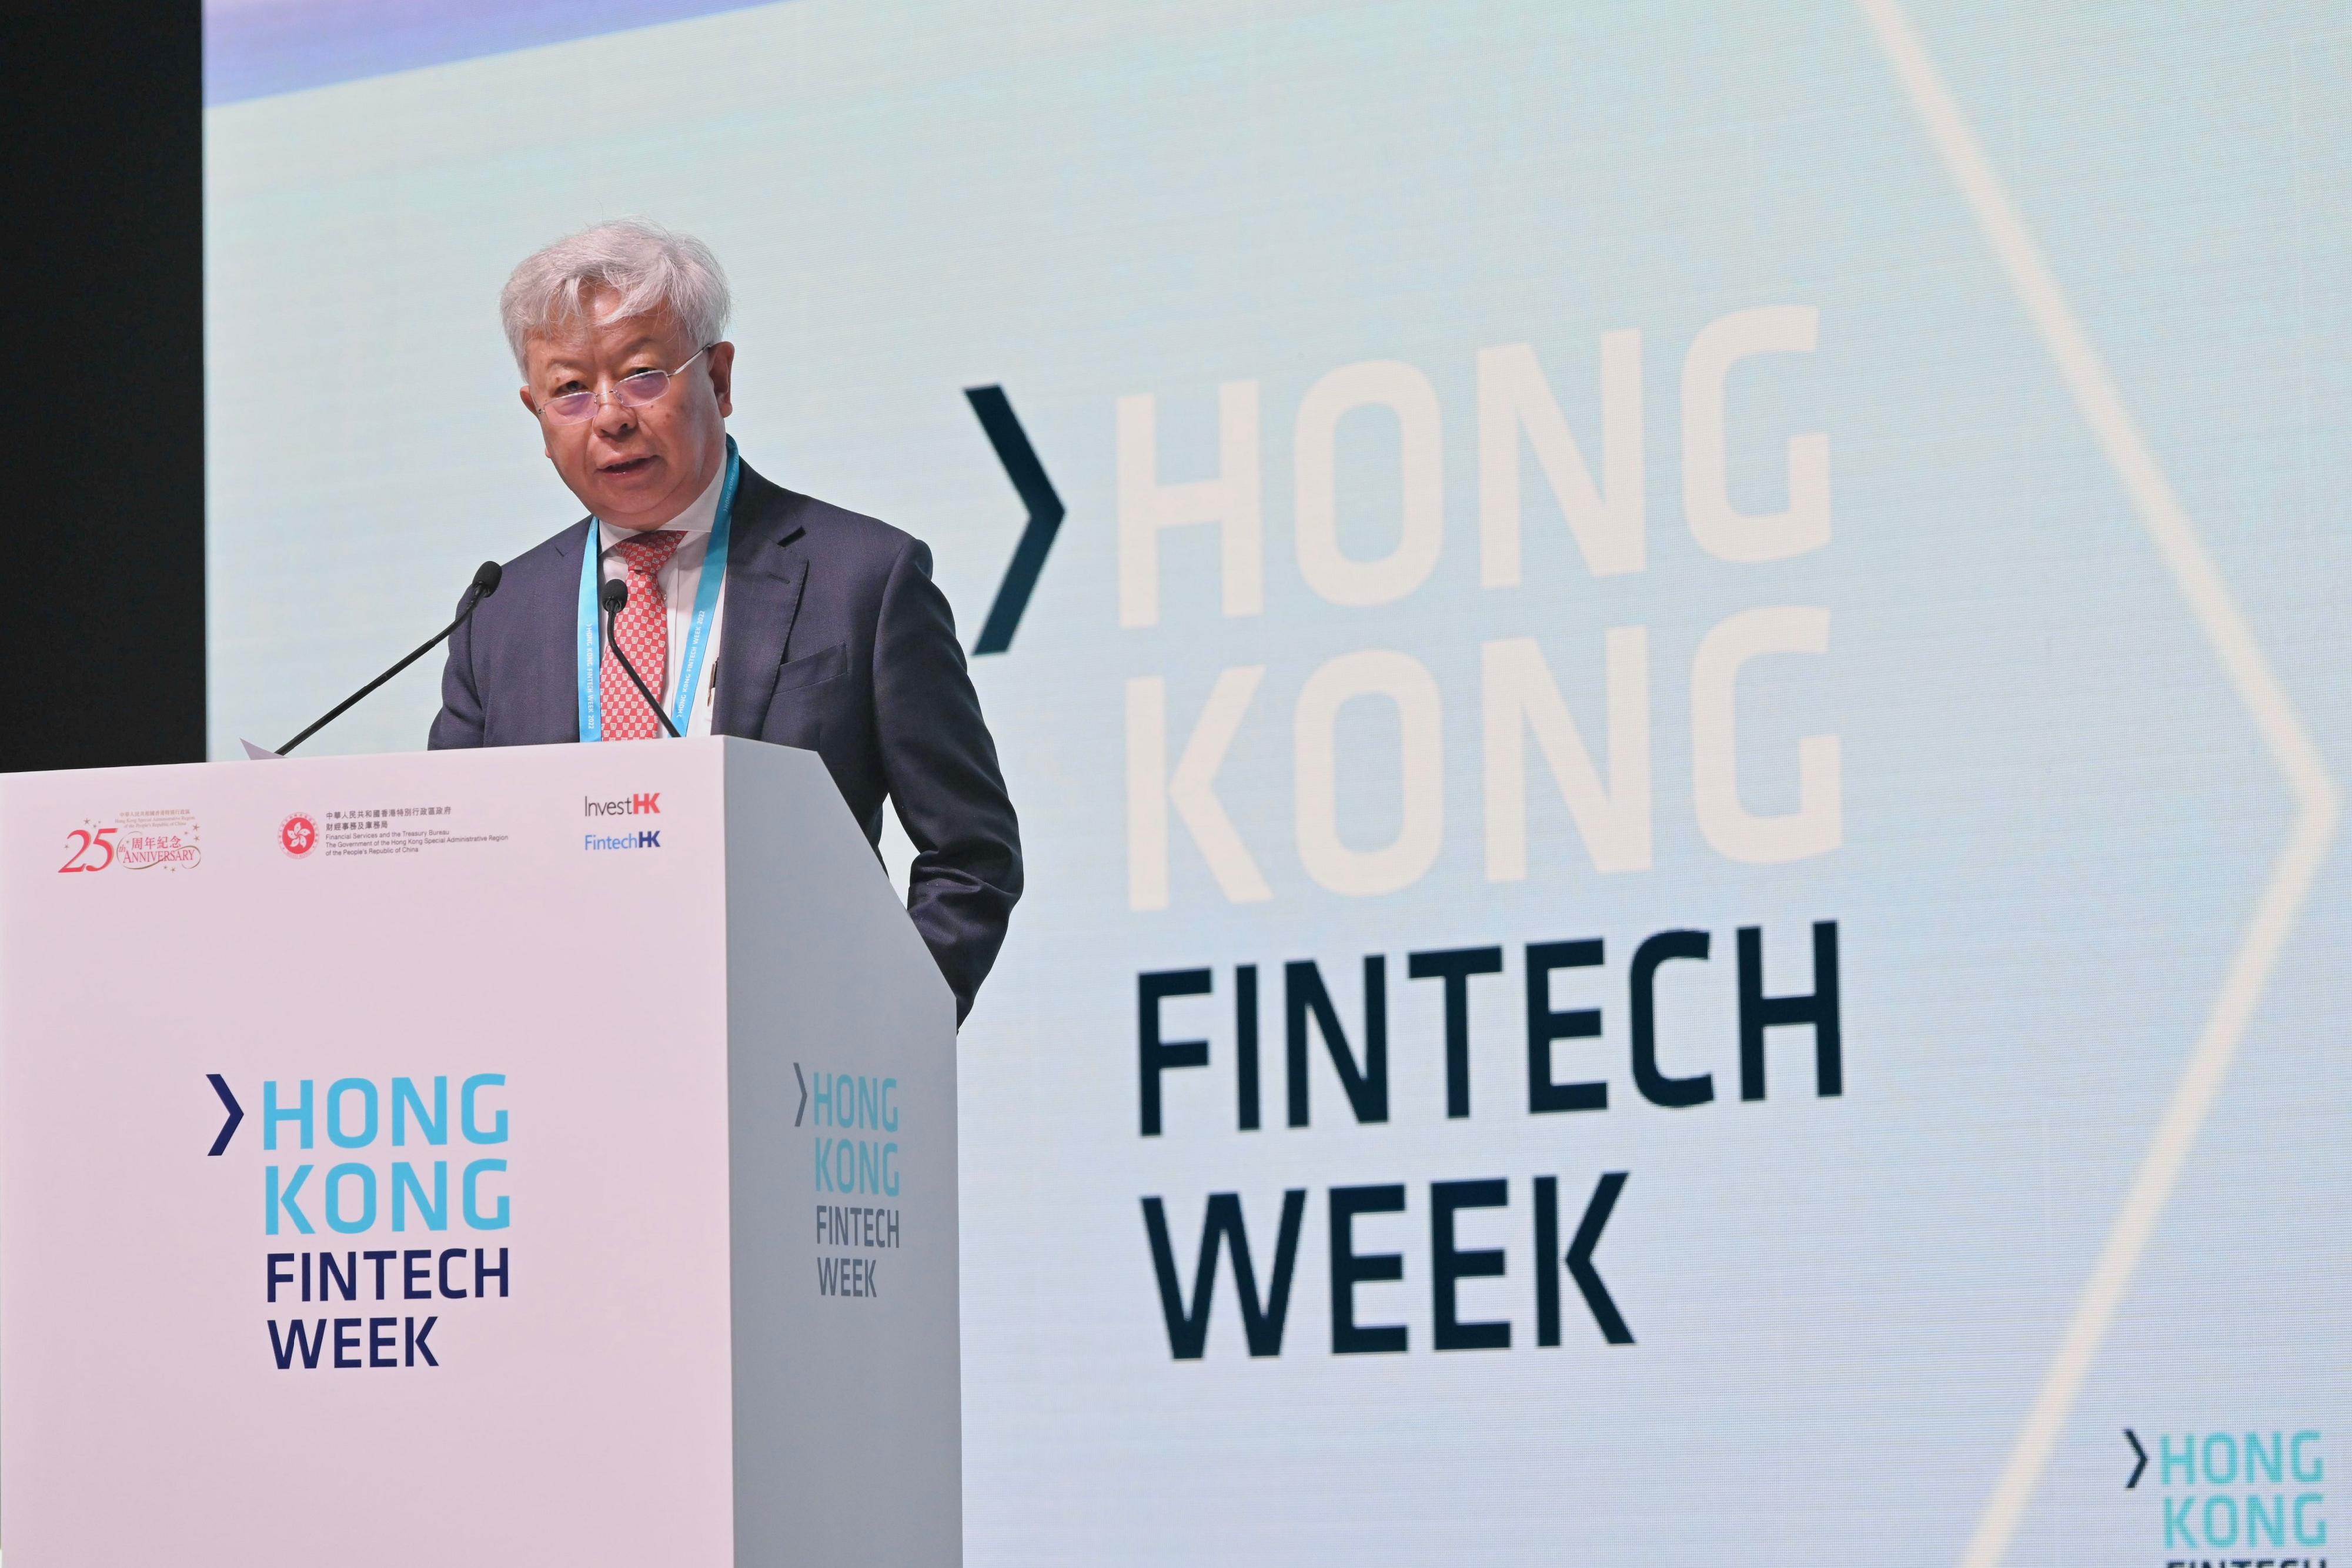 The five-day Hong Kong FinTech Week 2022 attracted over 30 000 visitors and more than five million online views from over 95 economies. Photo shows the President and Chair of the Asian Infrastructure Investment Bank, Mr Jin Liqun, presenting the keynote remarks on November 1.

